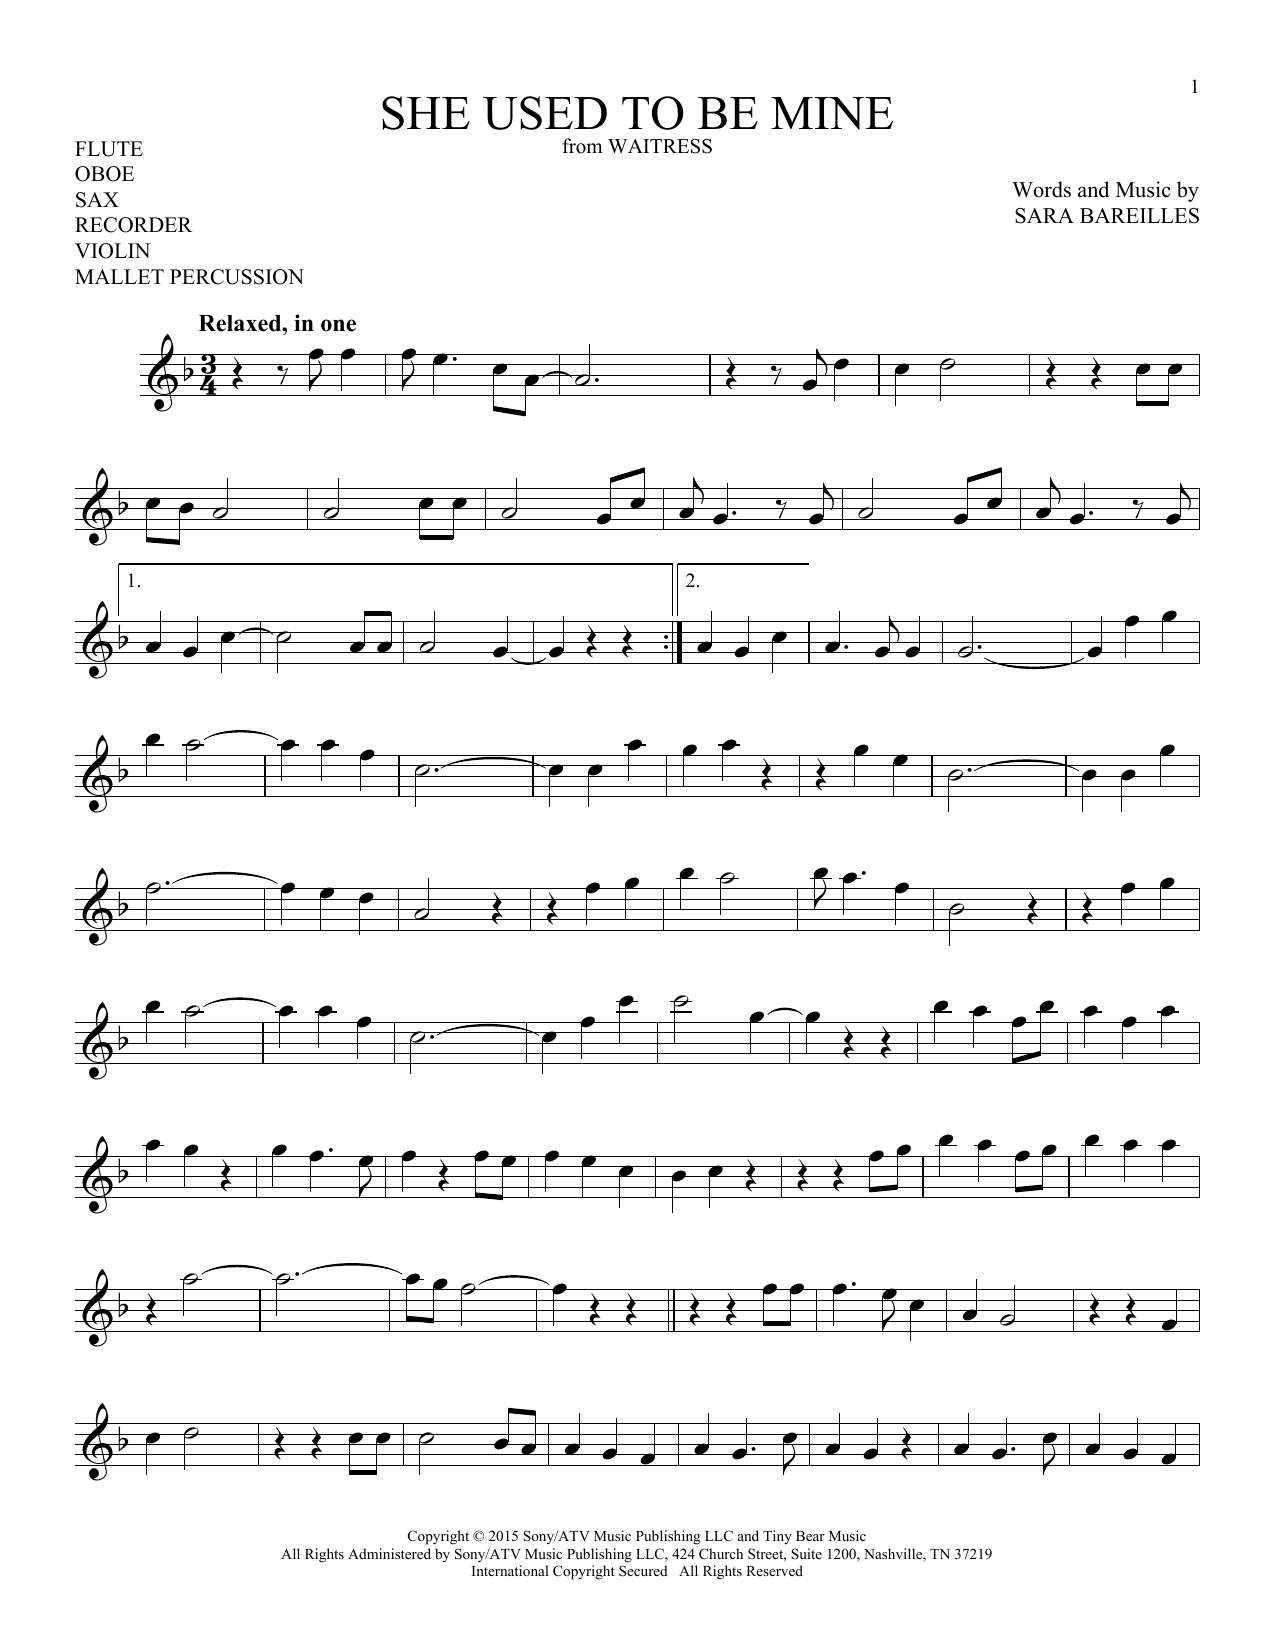 Download Sara Bareilles She Used To Be Mine (from Waitress) Sheet Music